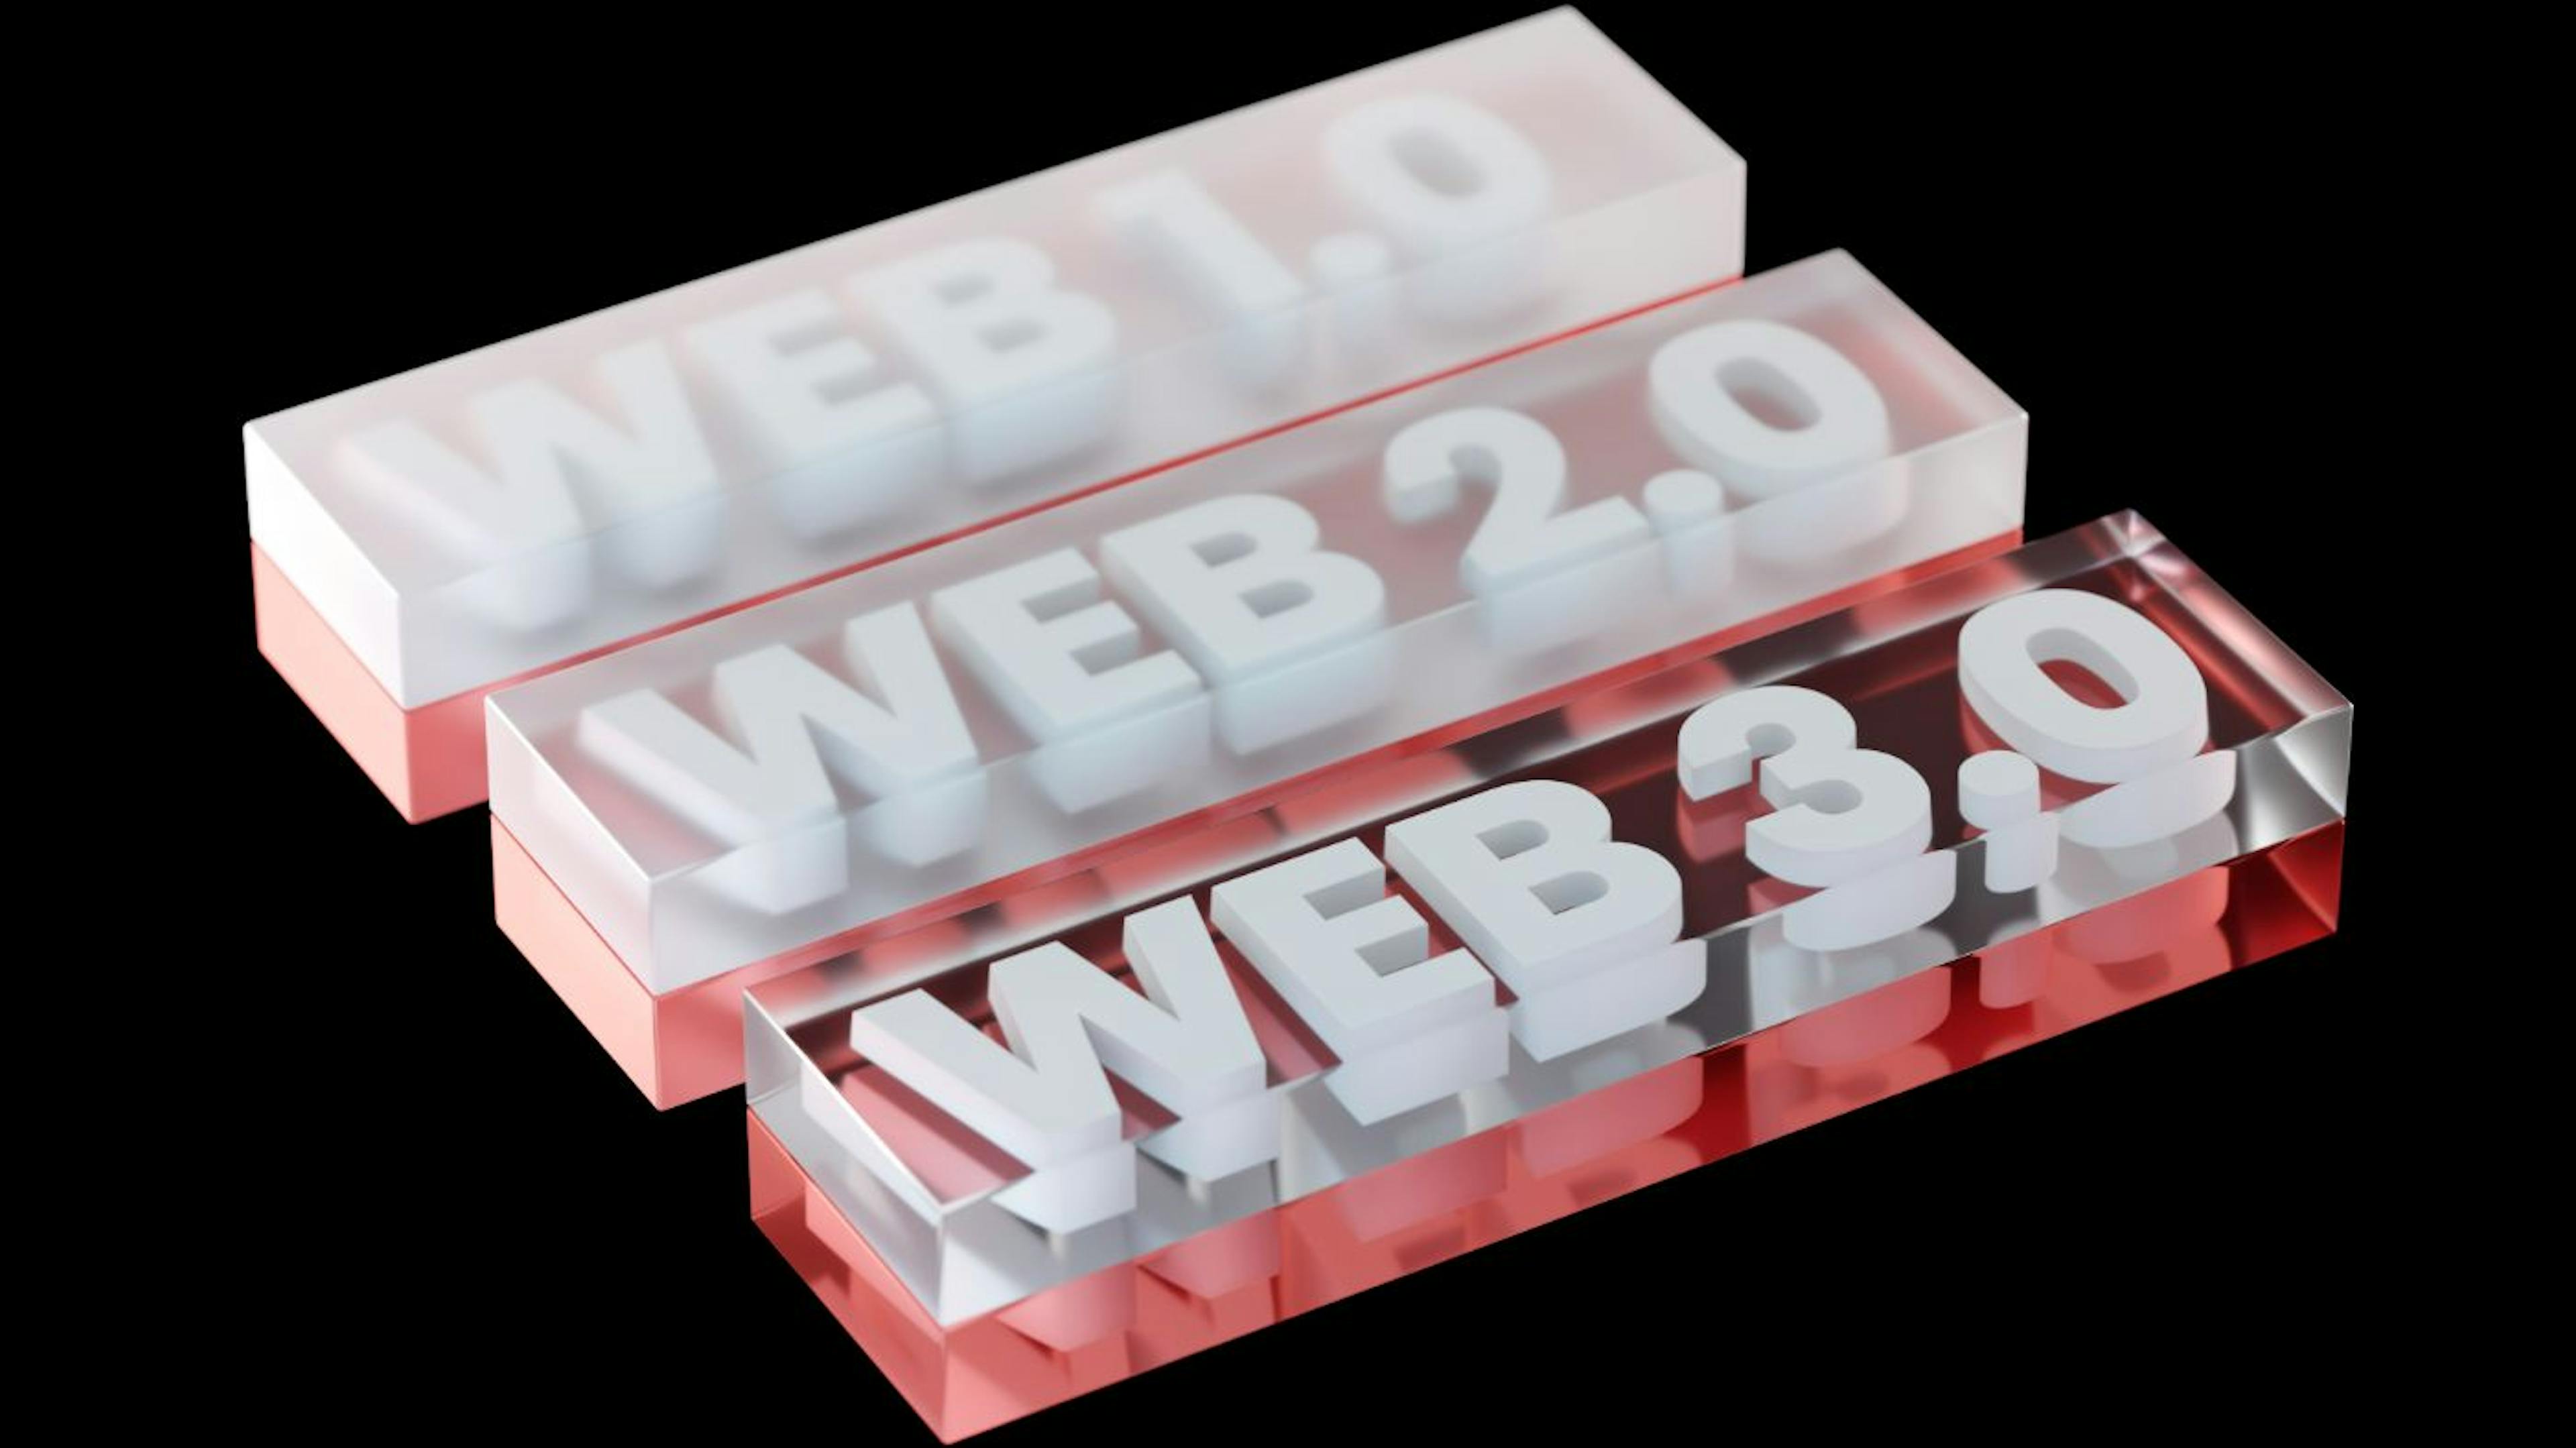 featured image - Web3 - A New Paradigm in the Digital World